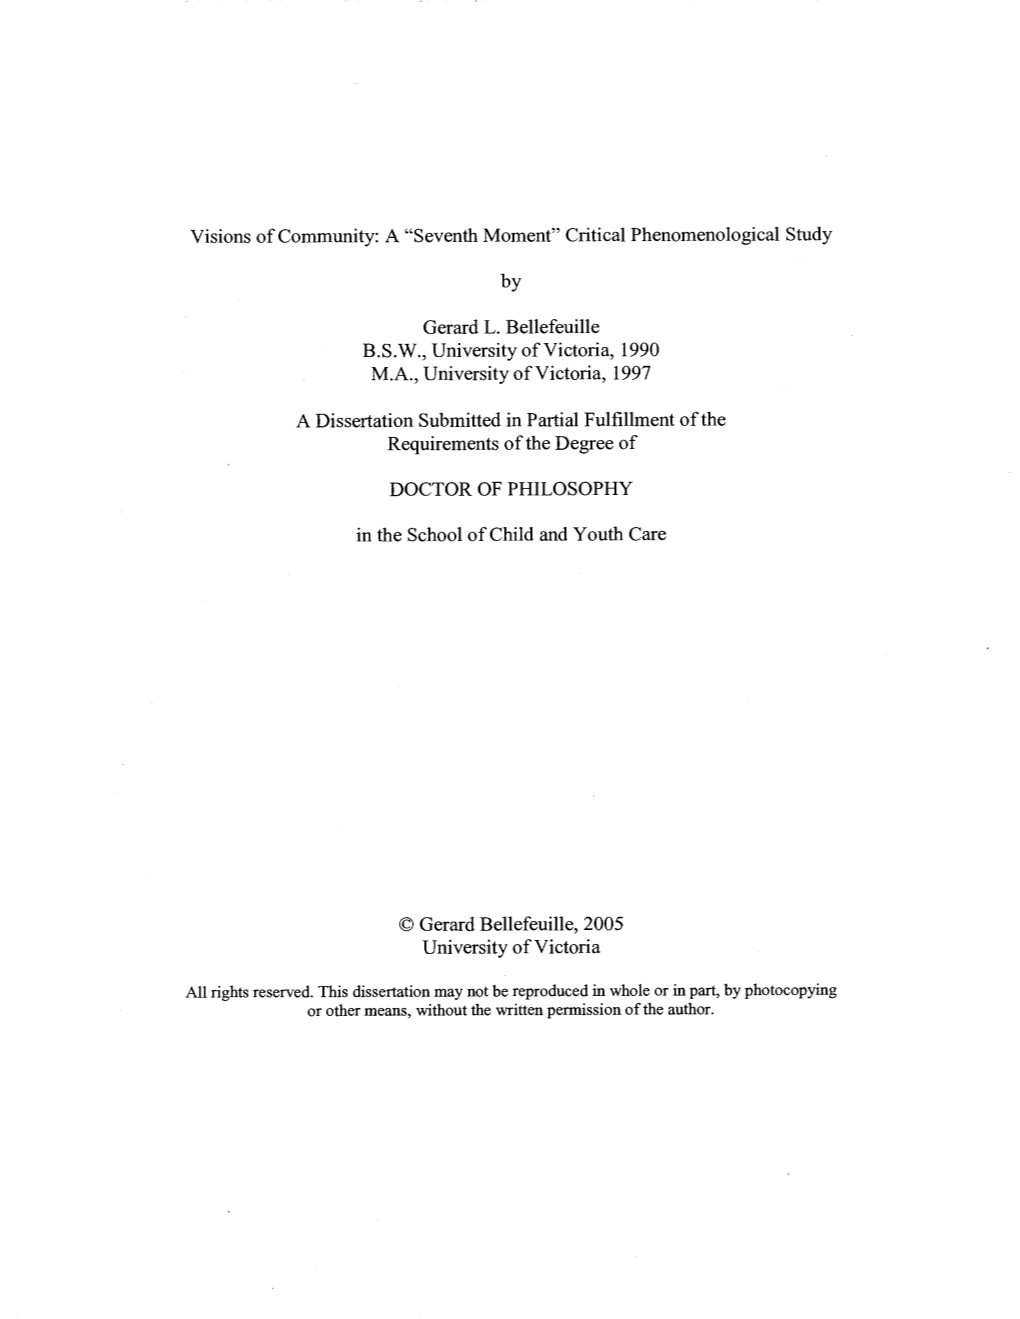 Critical Phenomenological Study Gerard L. Bellefeuille BSW